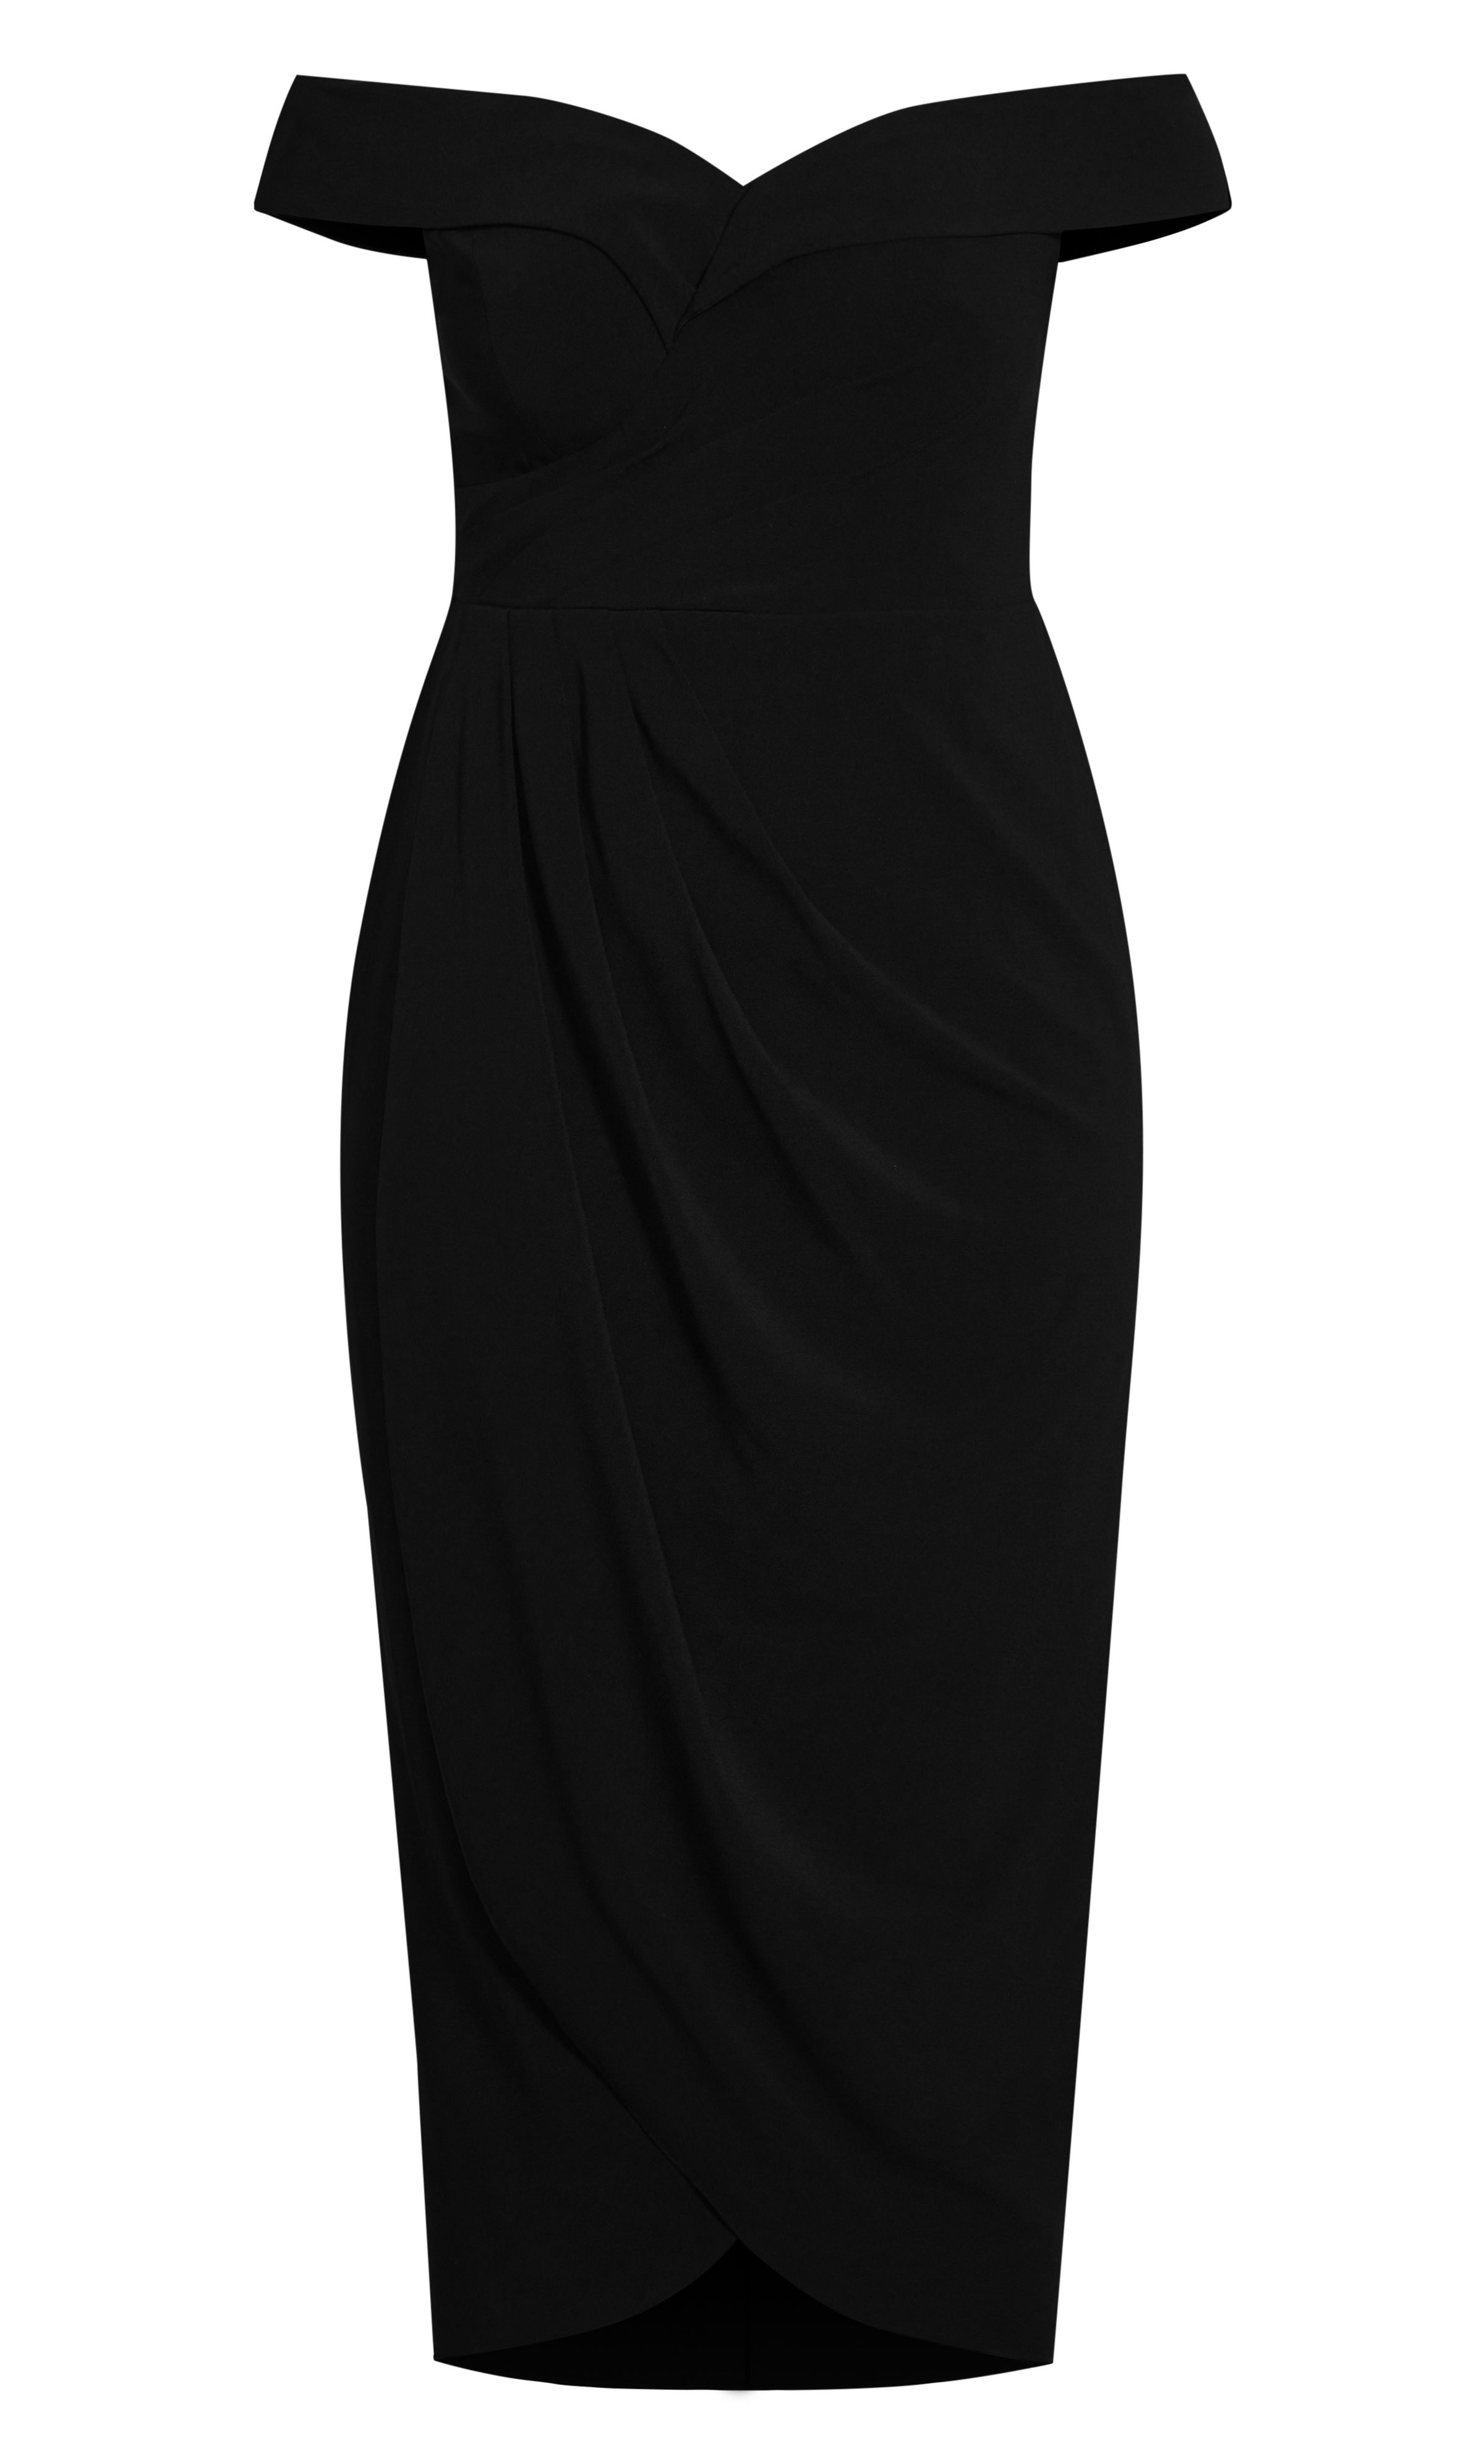 The all-black Ripple Love Dress offers a totally glam style that will ensure you always feel and look good at any special event. Perfected with a draped wrap-style silhouette and tulip hem, this cocktail dress is seriously sophisticated. Key Features Include: - Off shoulder V-neckline - Bust pleating above an empire line waist - Faux wrap skirt - Invisible zip closure - Flex fit elasticated shirring on sides for comfort - Soft woven fabrication - Fully lined - Tulip hemline Style this dress with a pair of strappy heels and a glitter pod clutch for a splash of shine!